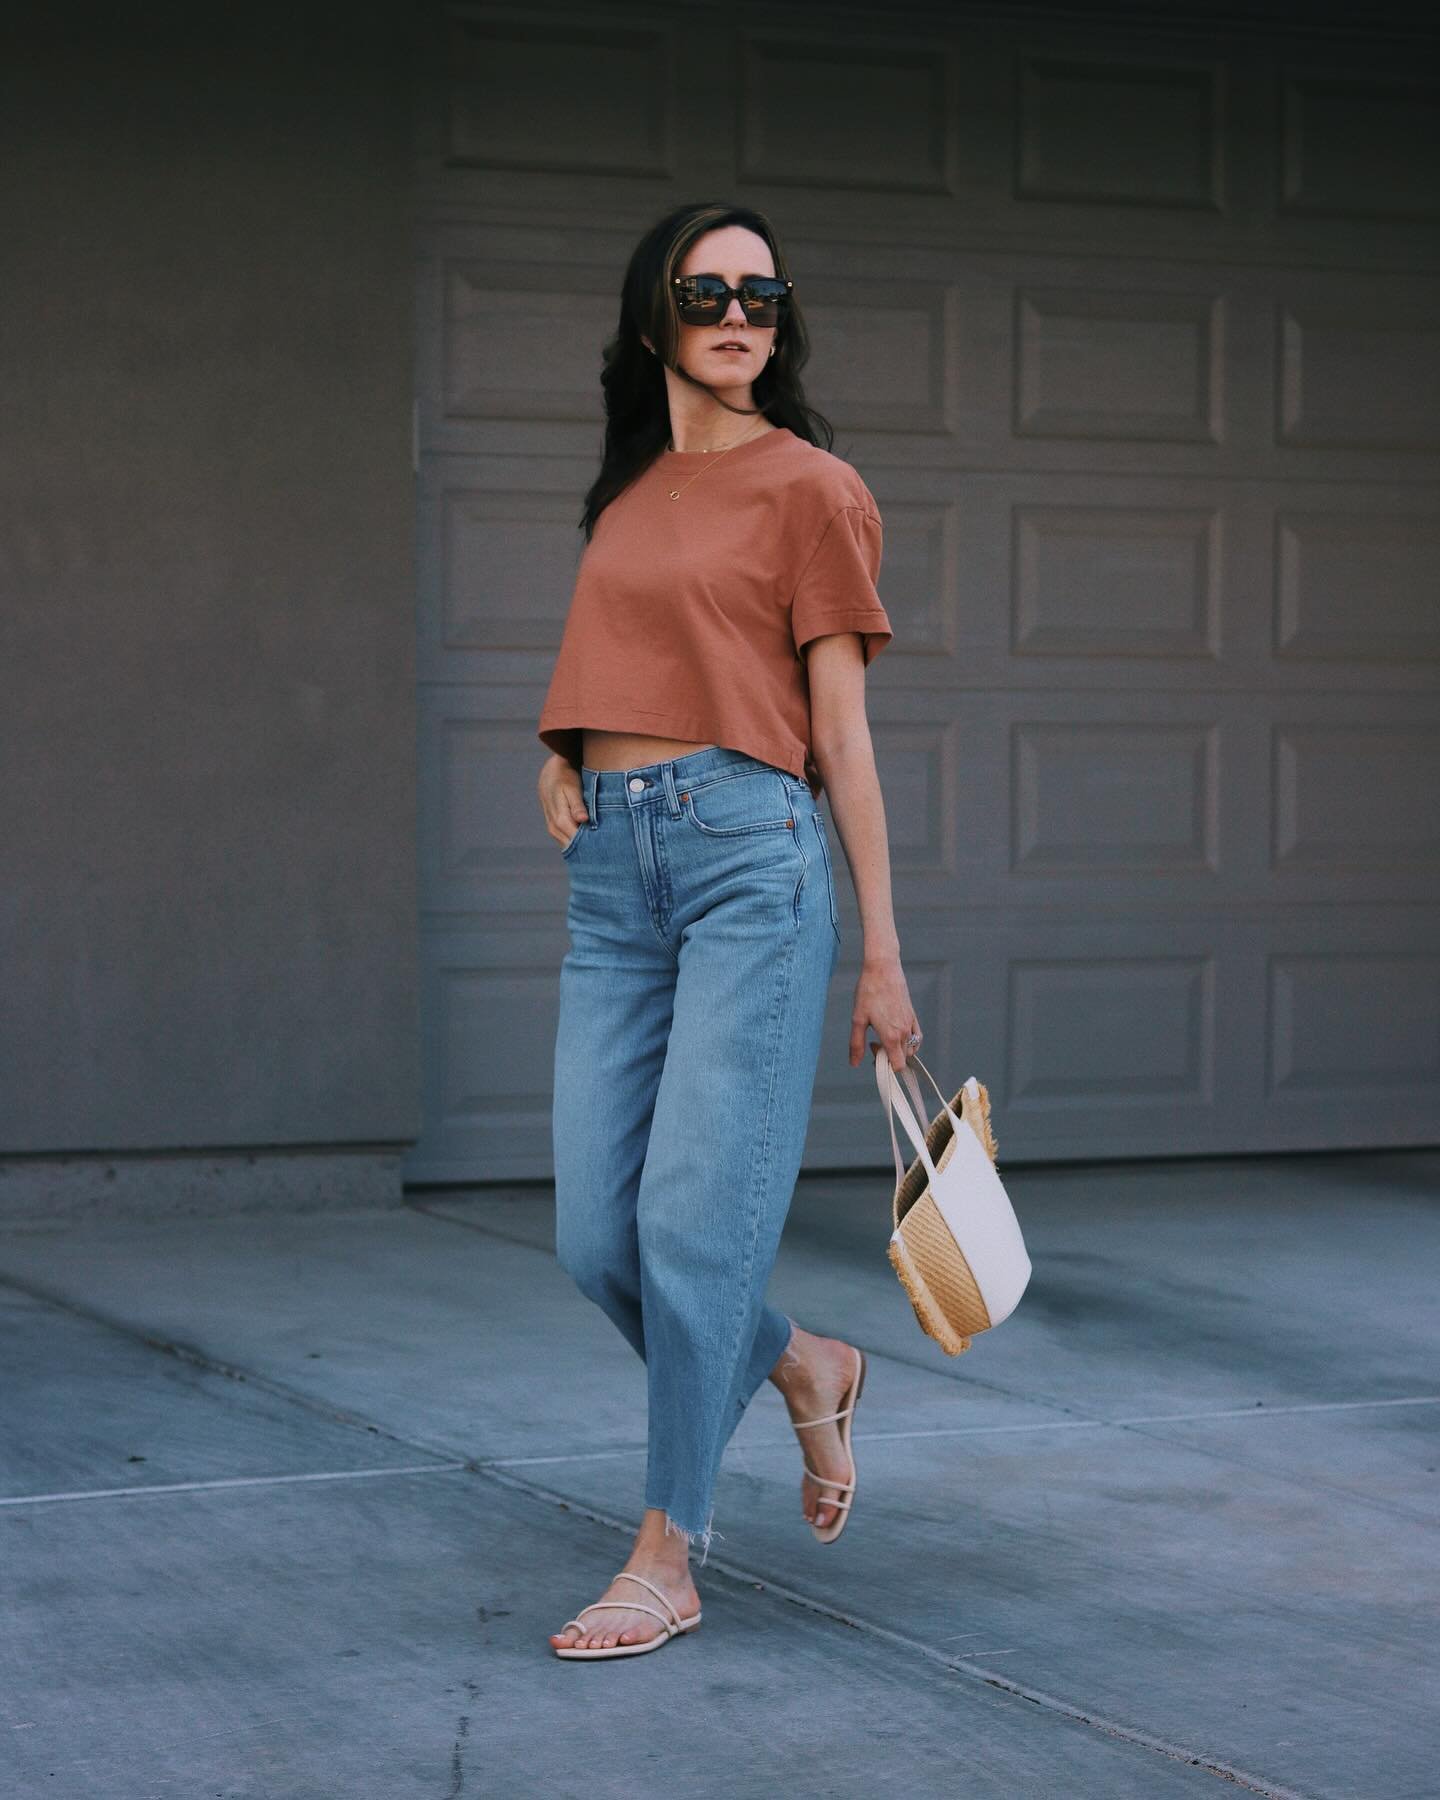 chasing away the Monday blues w/ my fave blue jeans 🩵 I&rsquo;m so into the wide leg silhouette this spring and can&rsquo;t get over how comfy they are. You already know I&rsquo;ve been wearing this pair on repeat and I don&rsquo;t plan on stopping 